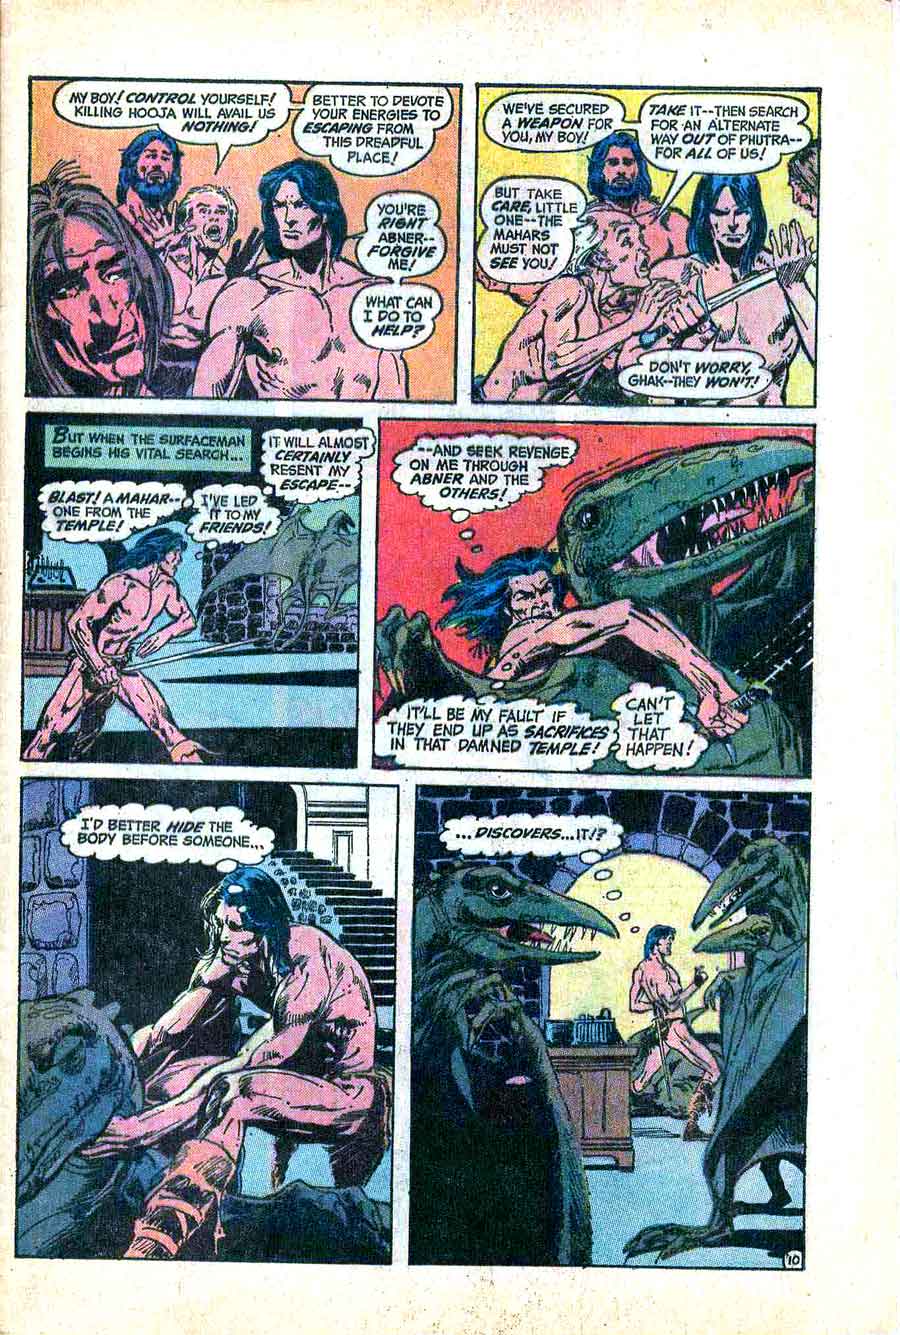 Weird Worlds #3 bronze age 1970s science fiction dc comic book page art by Neal Adams